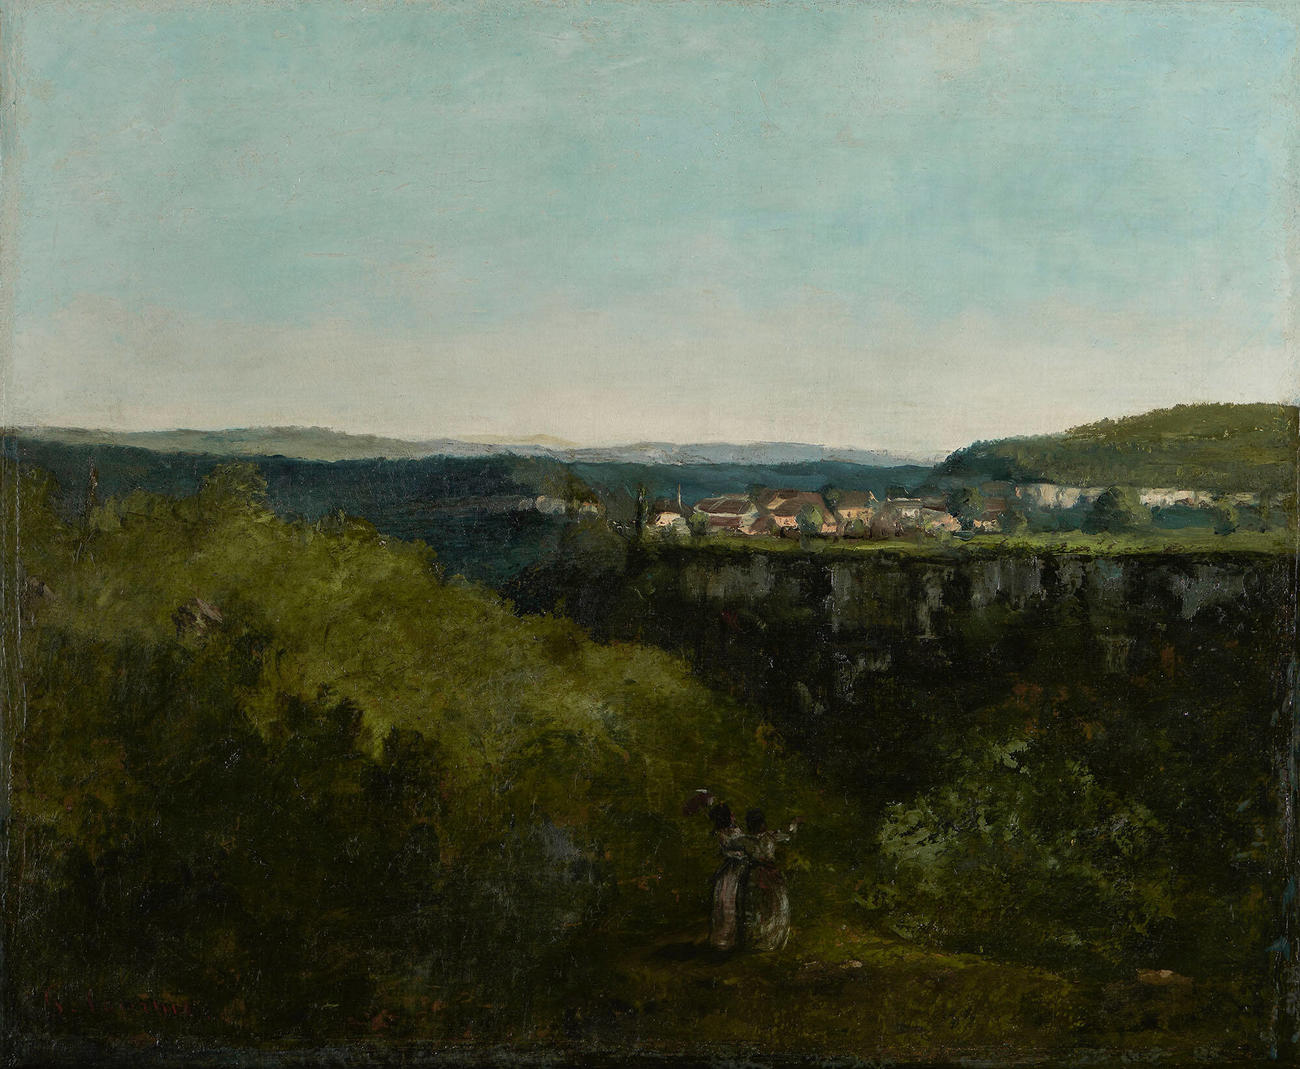  An oil painting of a landscape with two women in the foreground looking out into the distance where there are hills and a cluster of small buildings. 